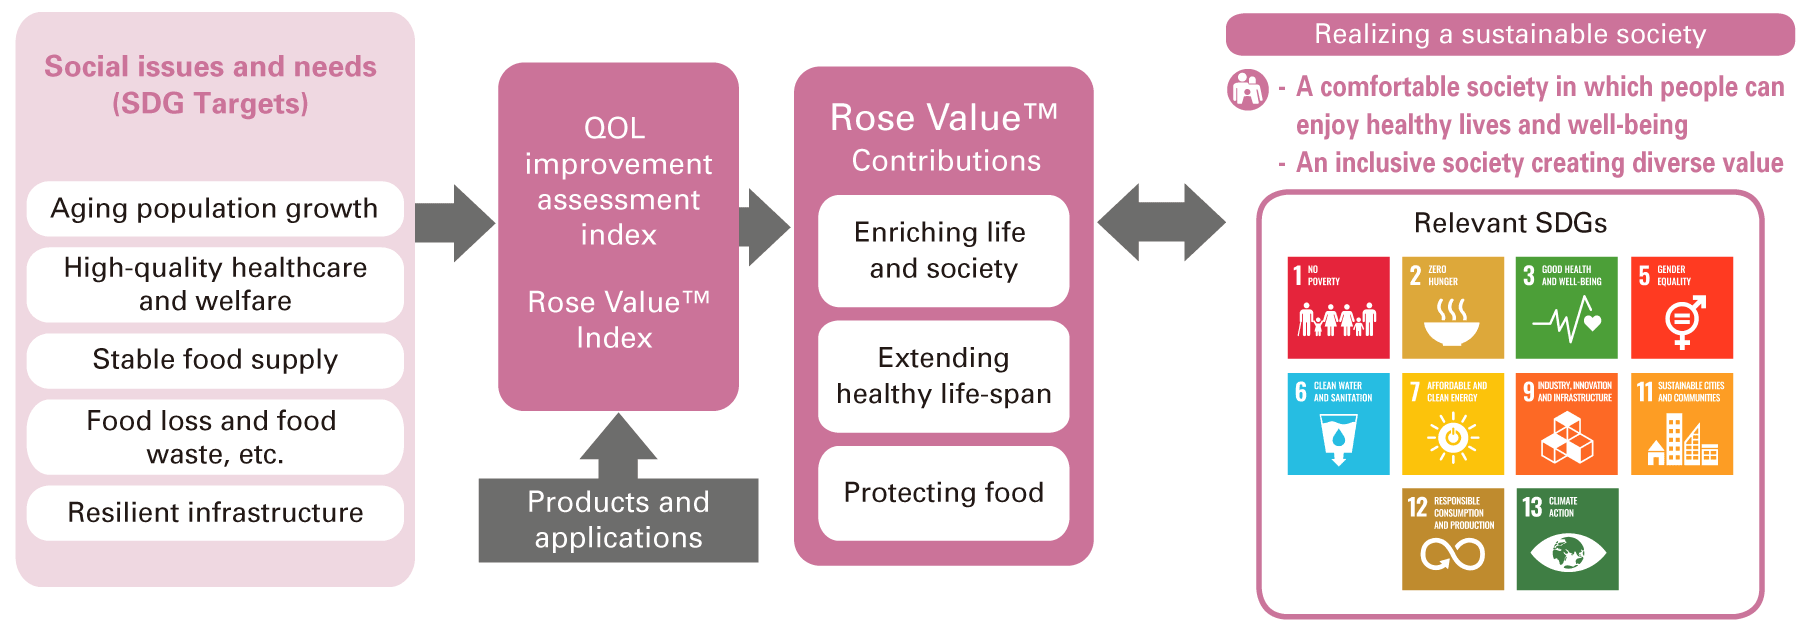 The Goal of Rose Value™